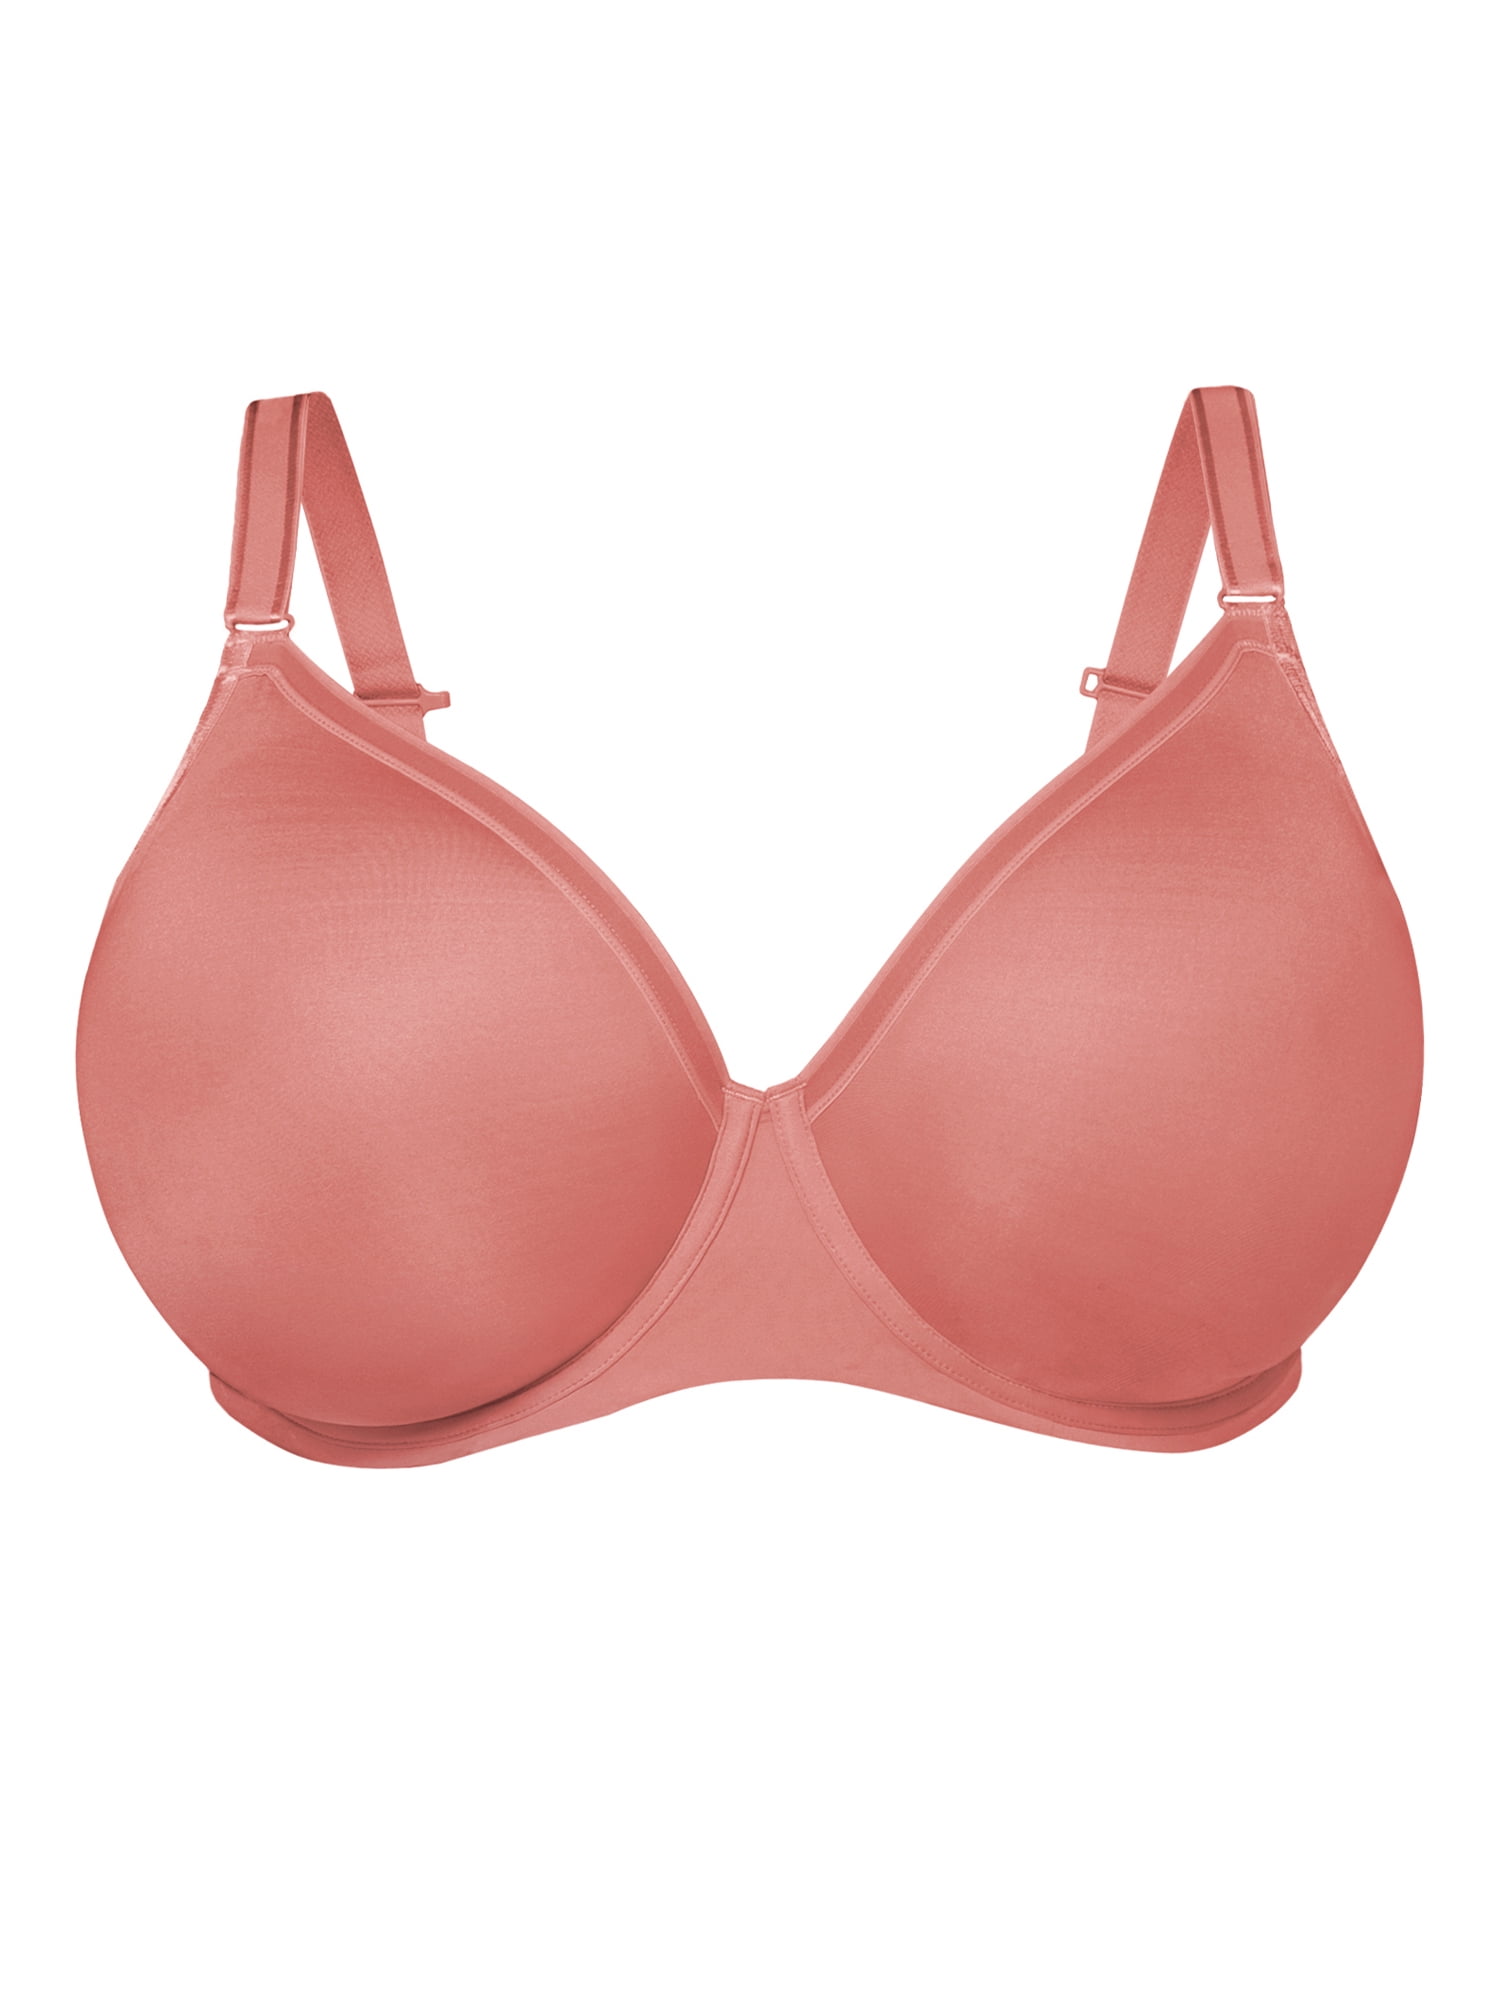 IFG - Fit for any outfit or occasion, our Luxury 07 bra